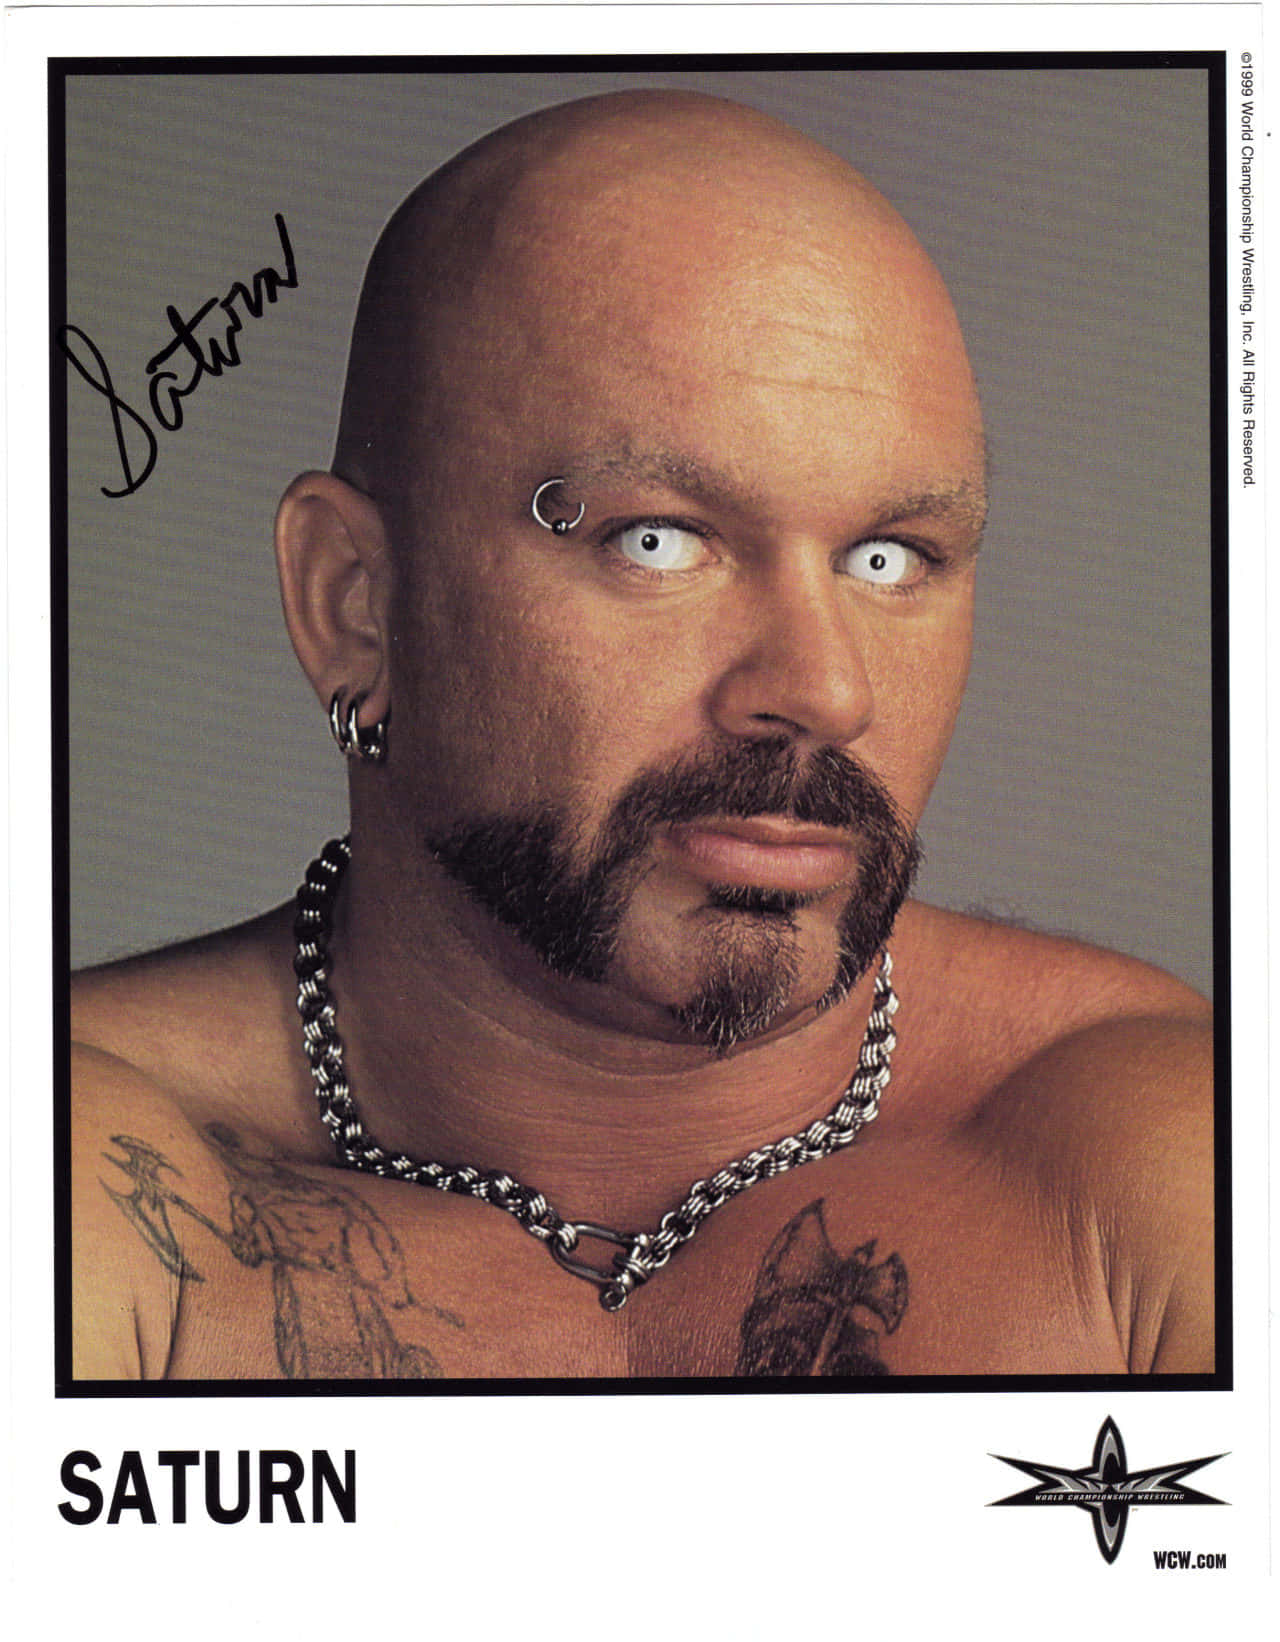 Perry Saturn posing in a signed poster Wallpaper